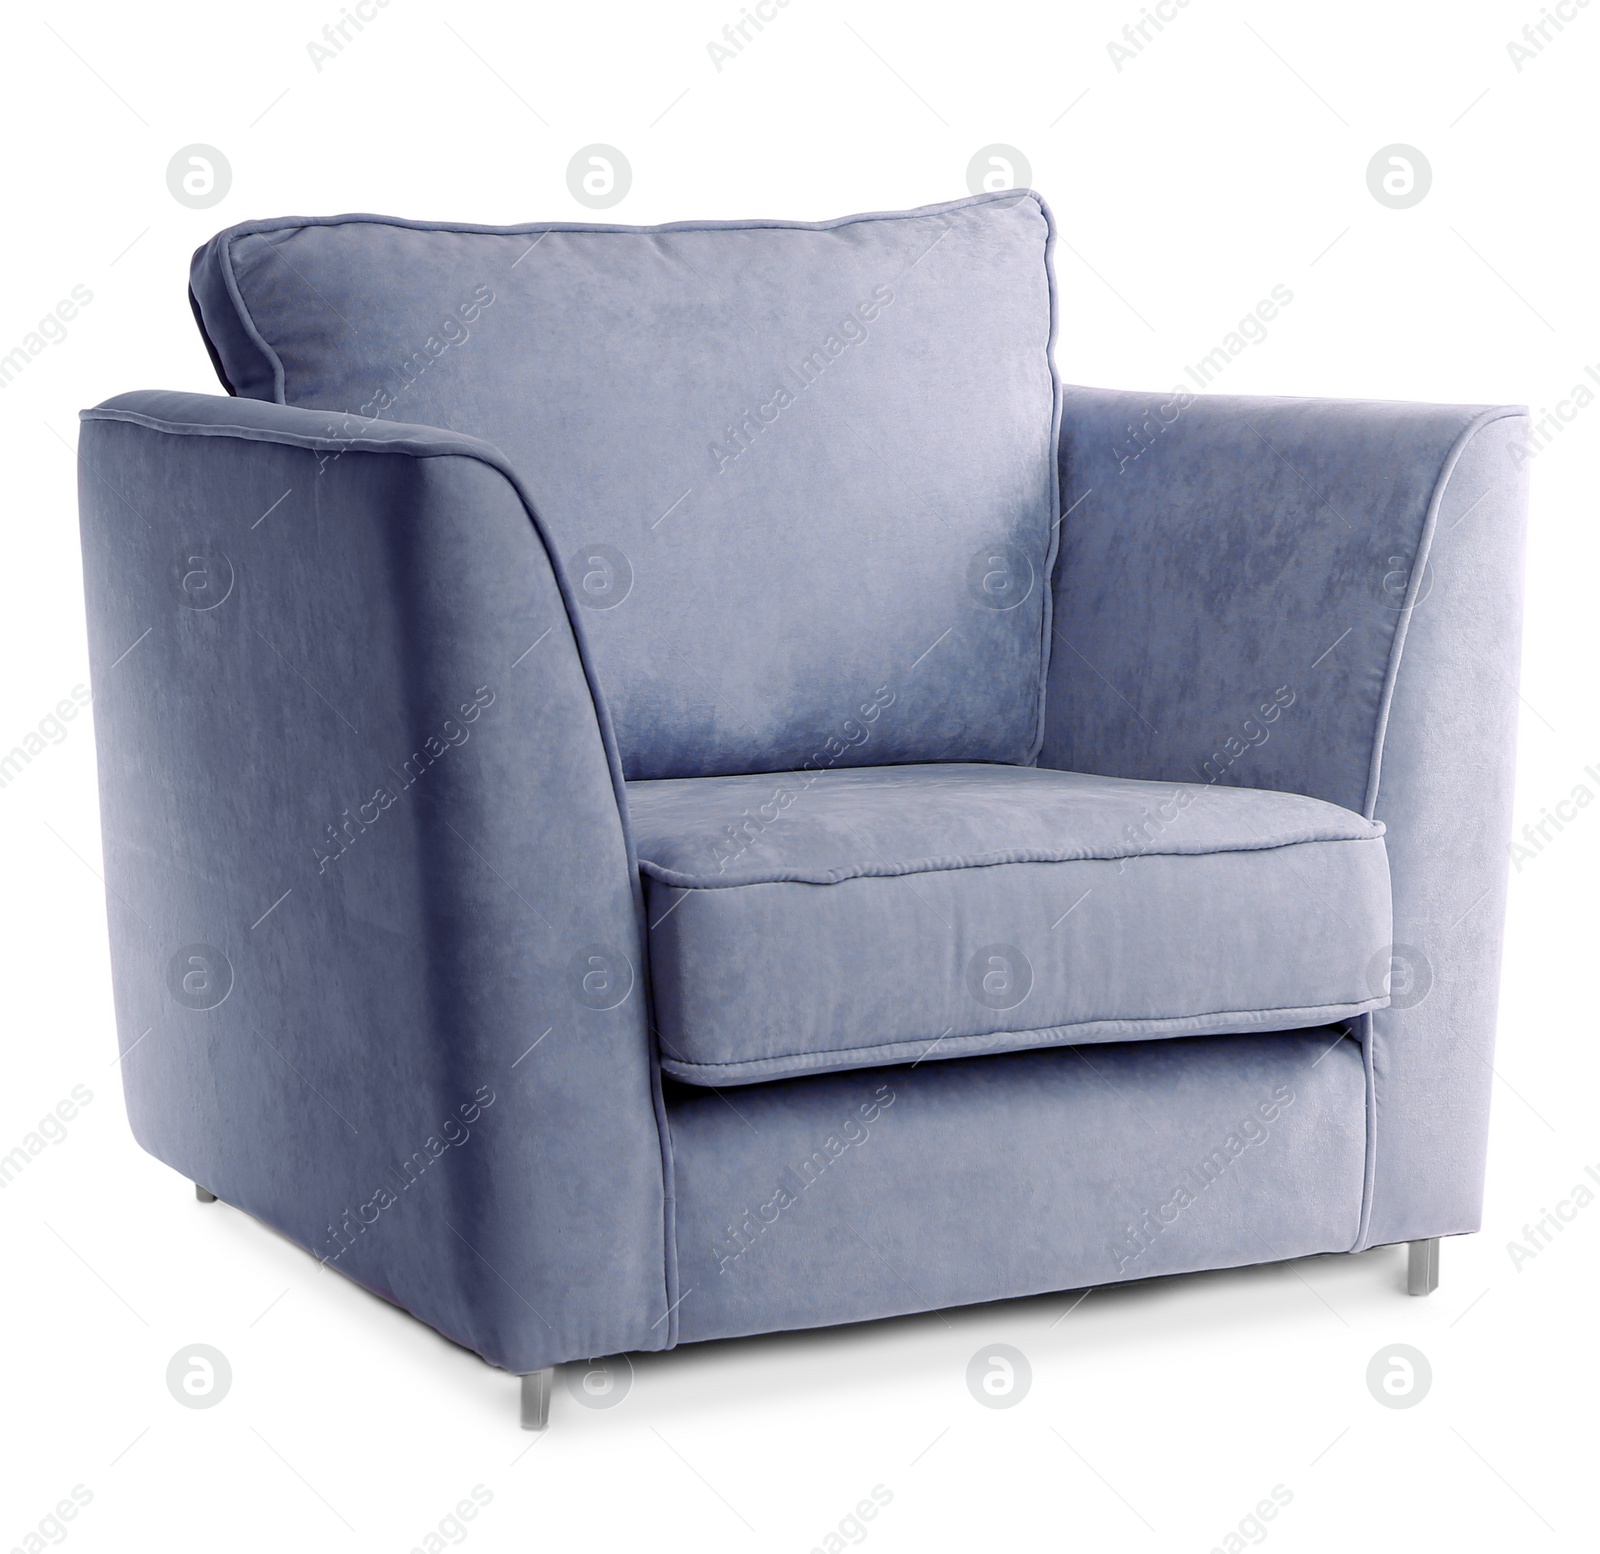 Image of One comfortable slate grey armchair isolated on white